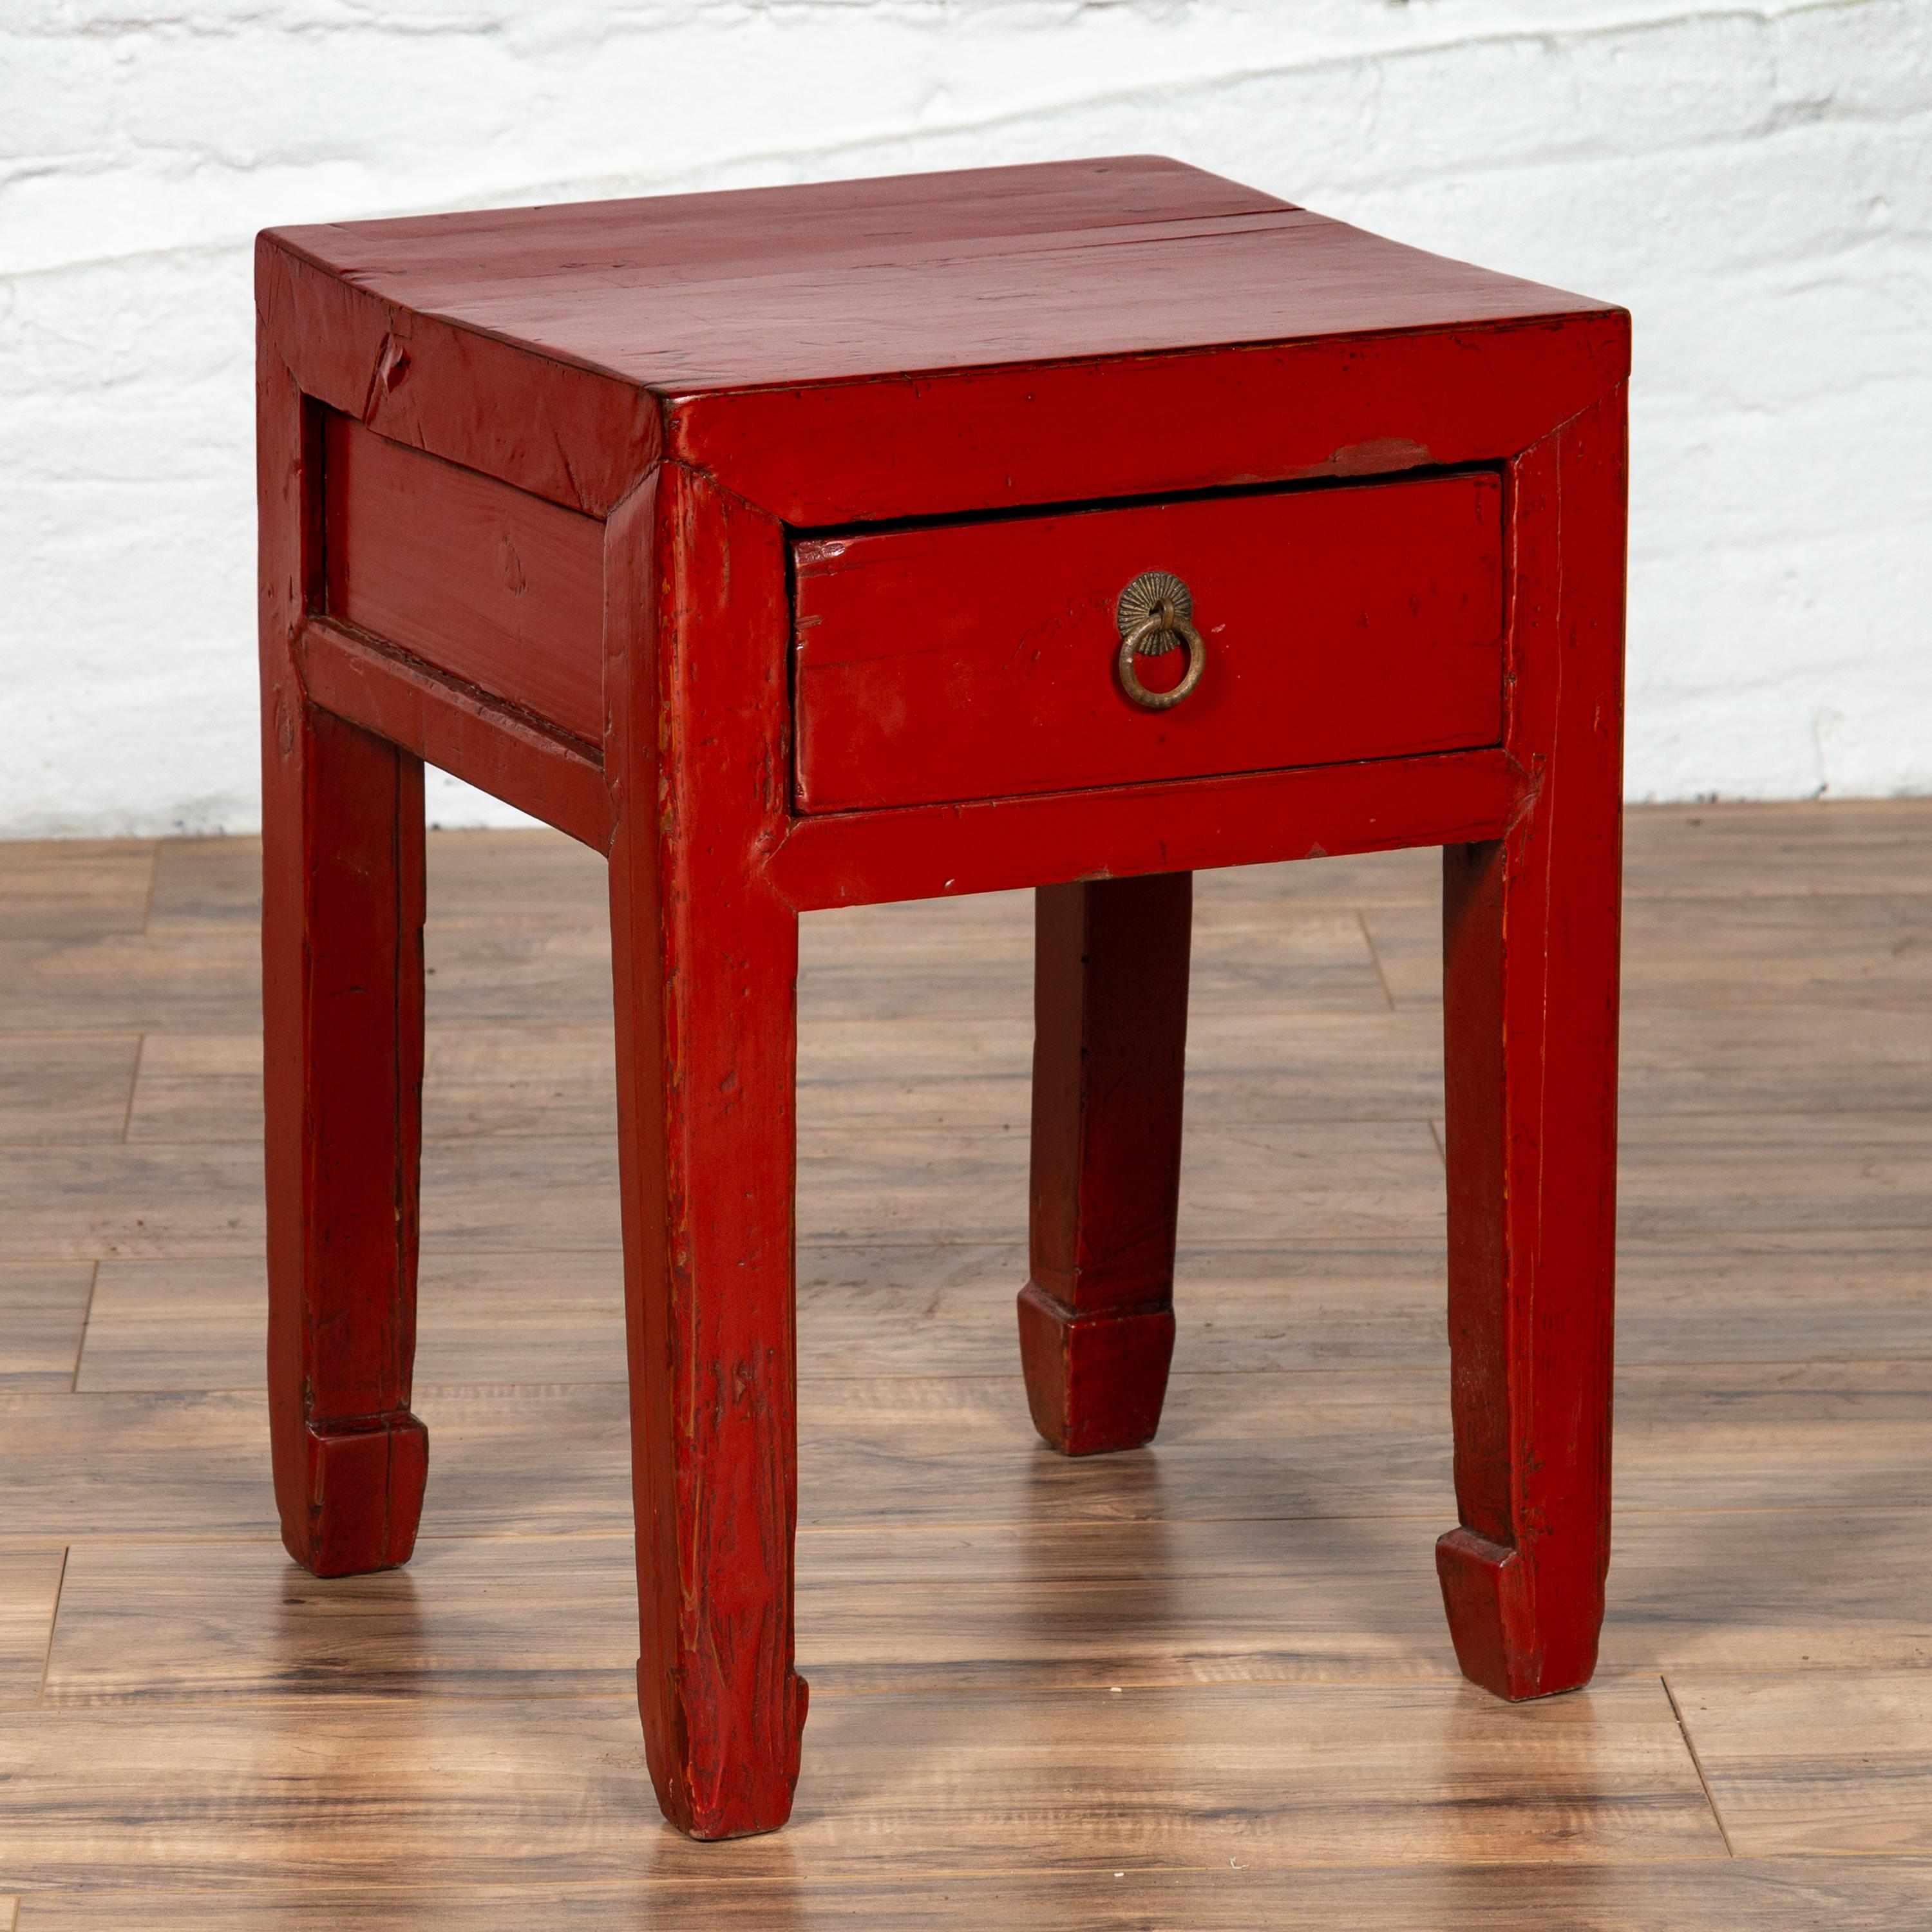 Chinese Early 20th Century Red Lacquer Stool with Drawer and Horse-Hoof Legs 2